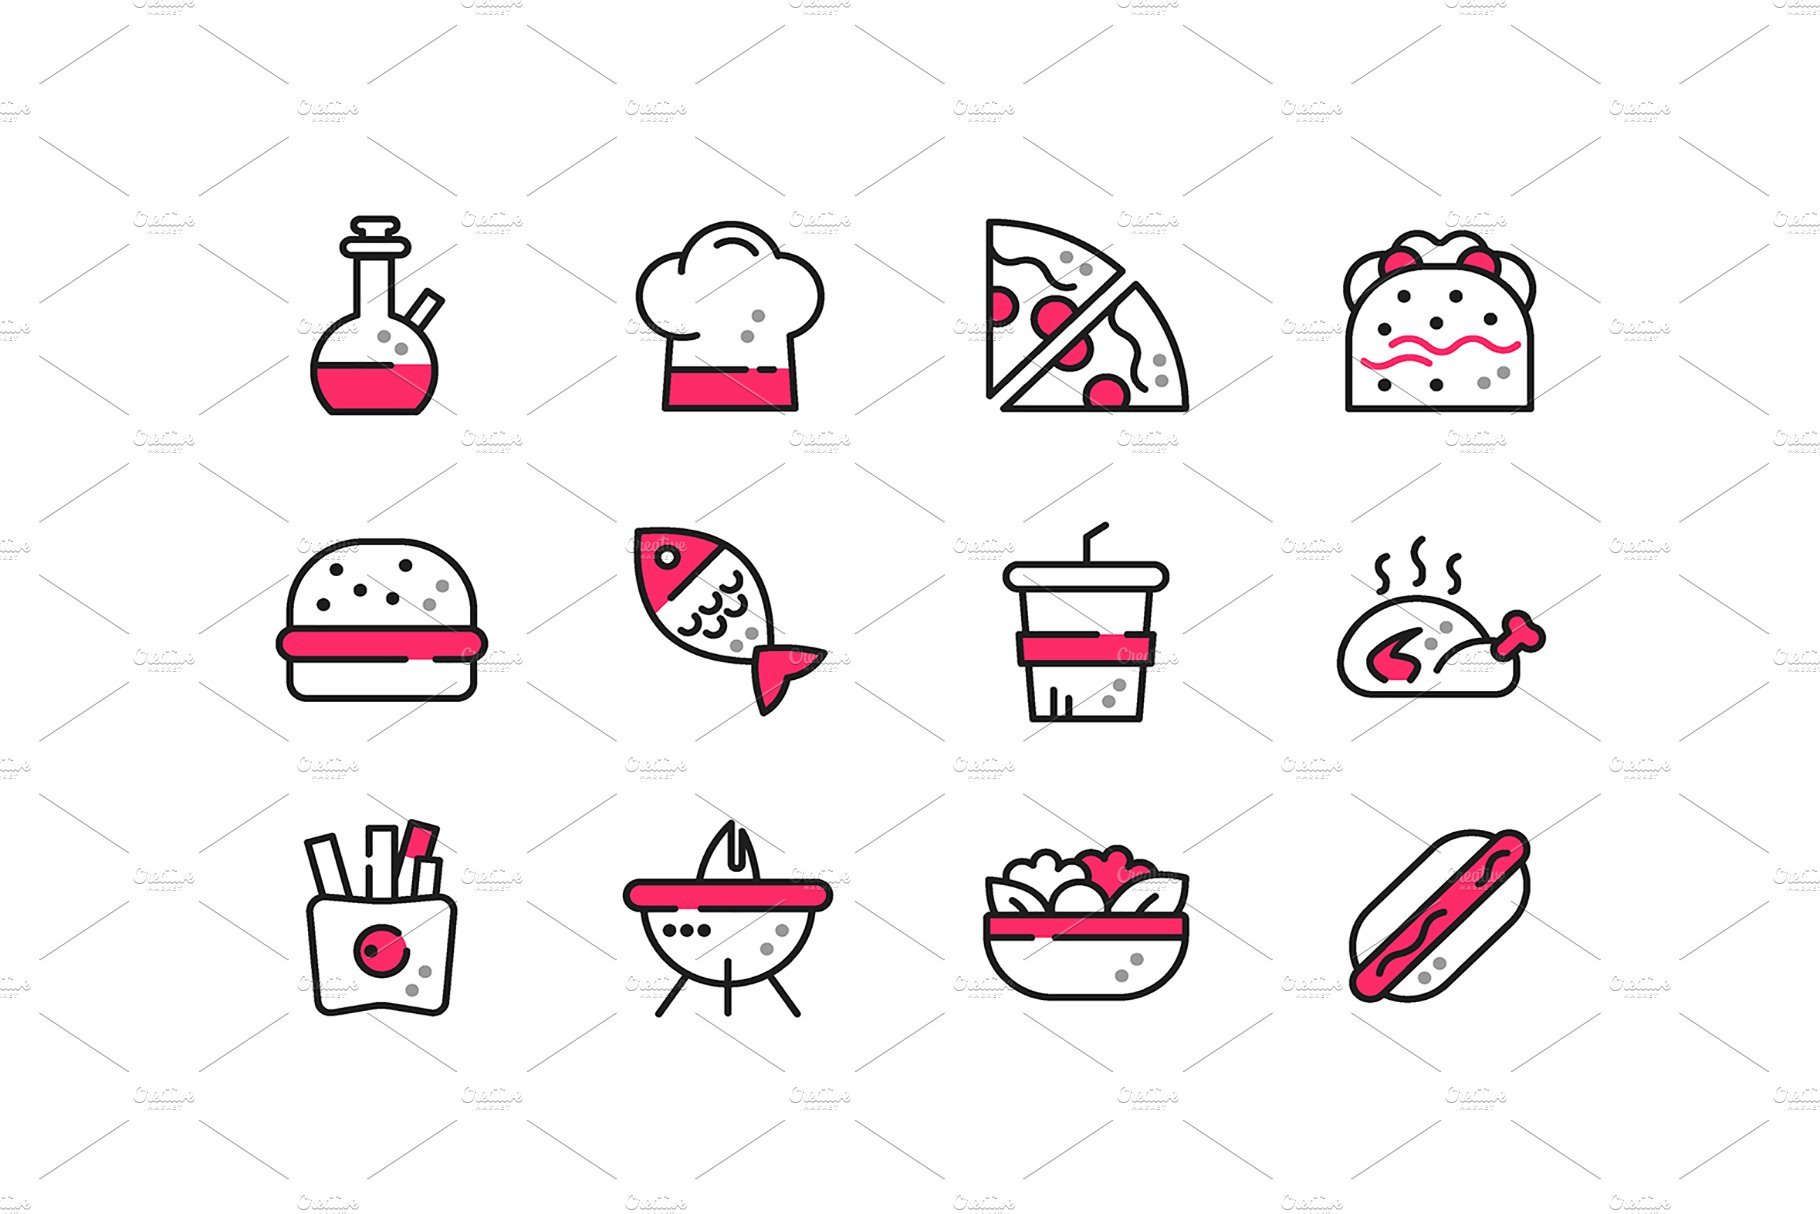 FastFood IconSet cover image.